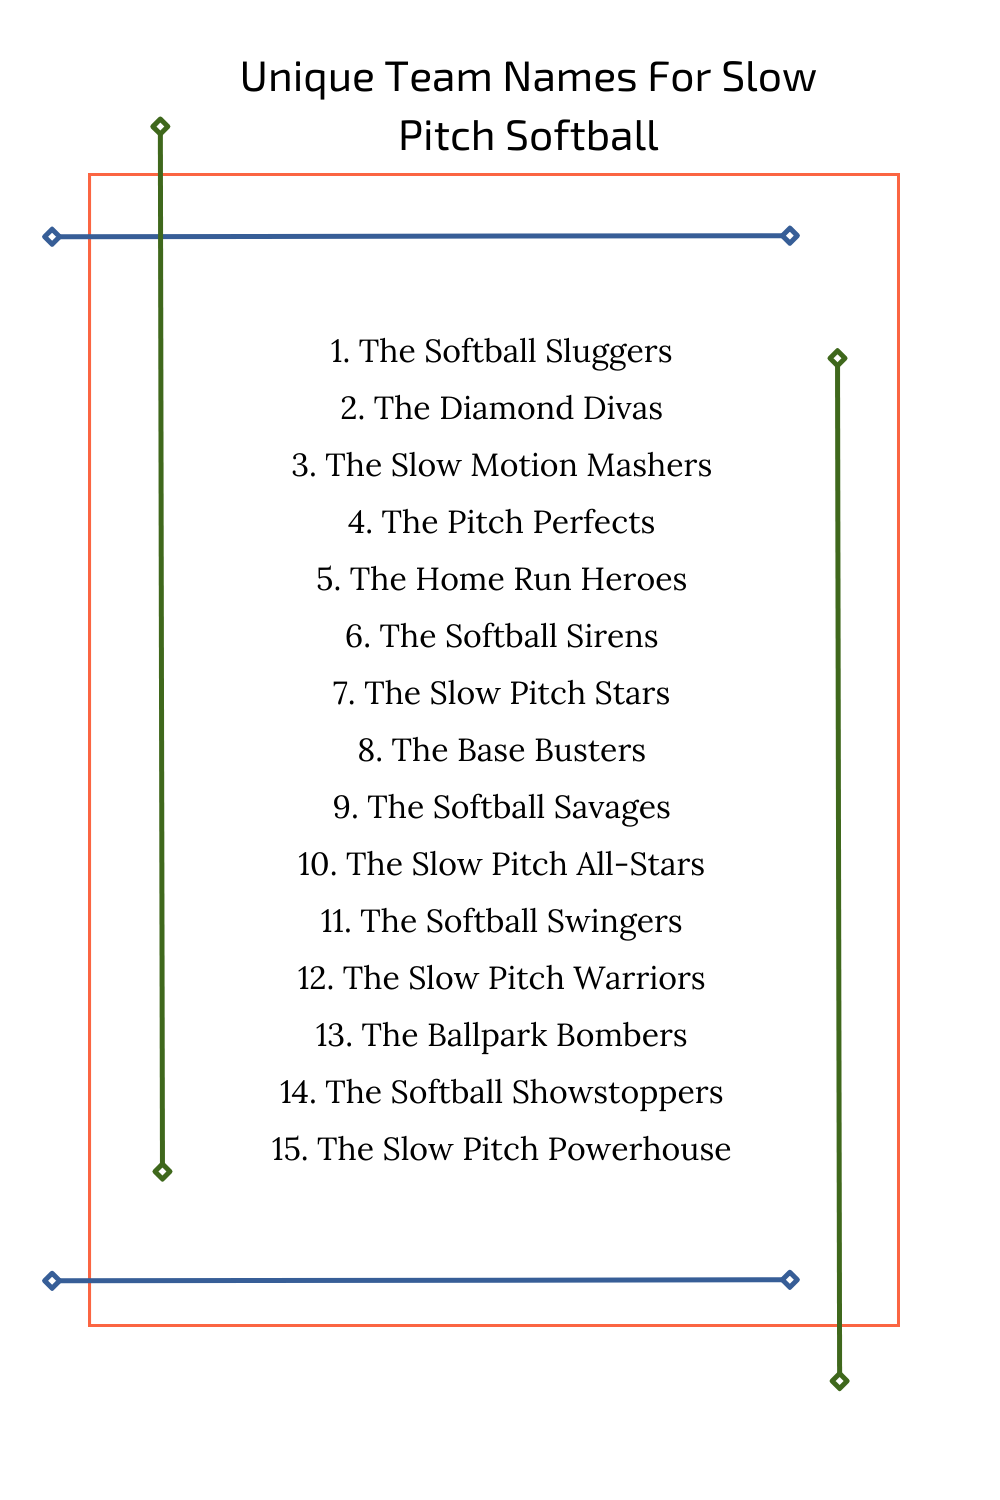 Unique Team Names For Slow Pitch Softball